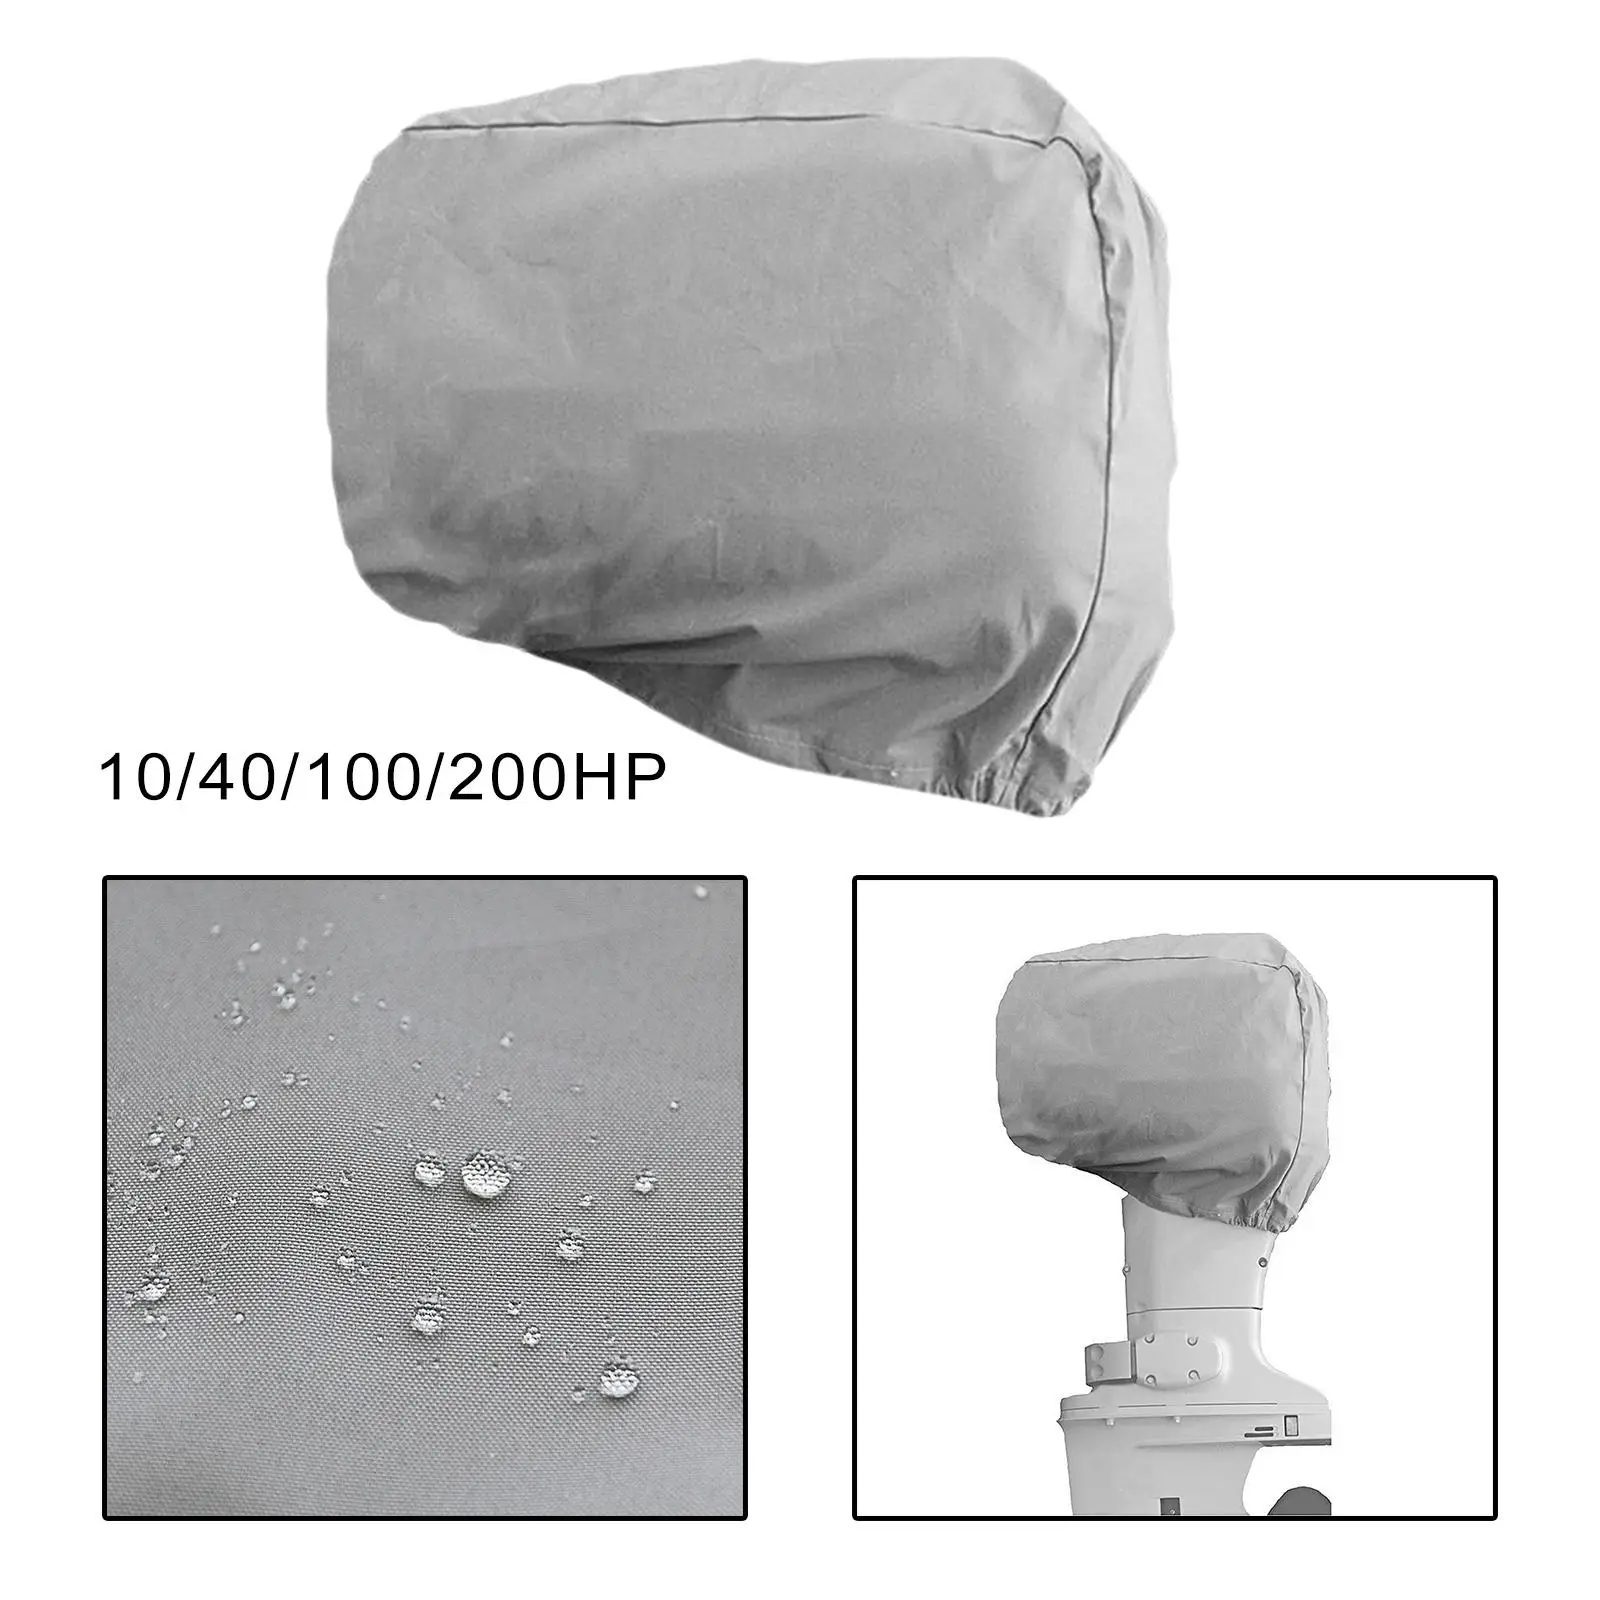 Outboard Motor Cover Tear Resistant Engine Protector Adjustable Oxford Silver Waterproof Boat Hood Covers for Boating Fishing